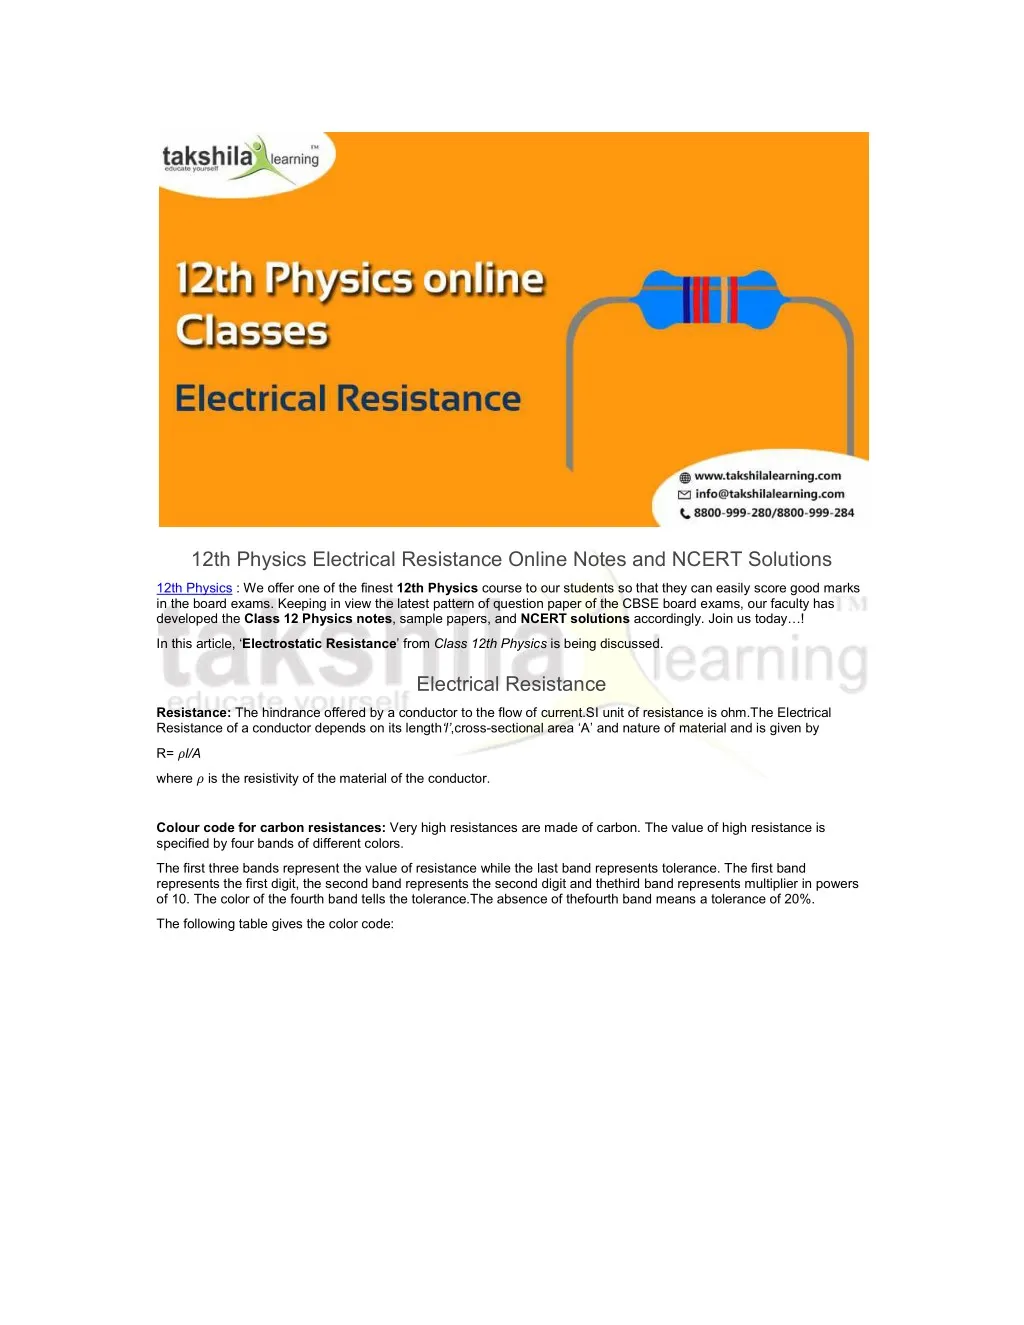 12th physics electrical resistance online notes